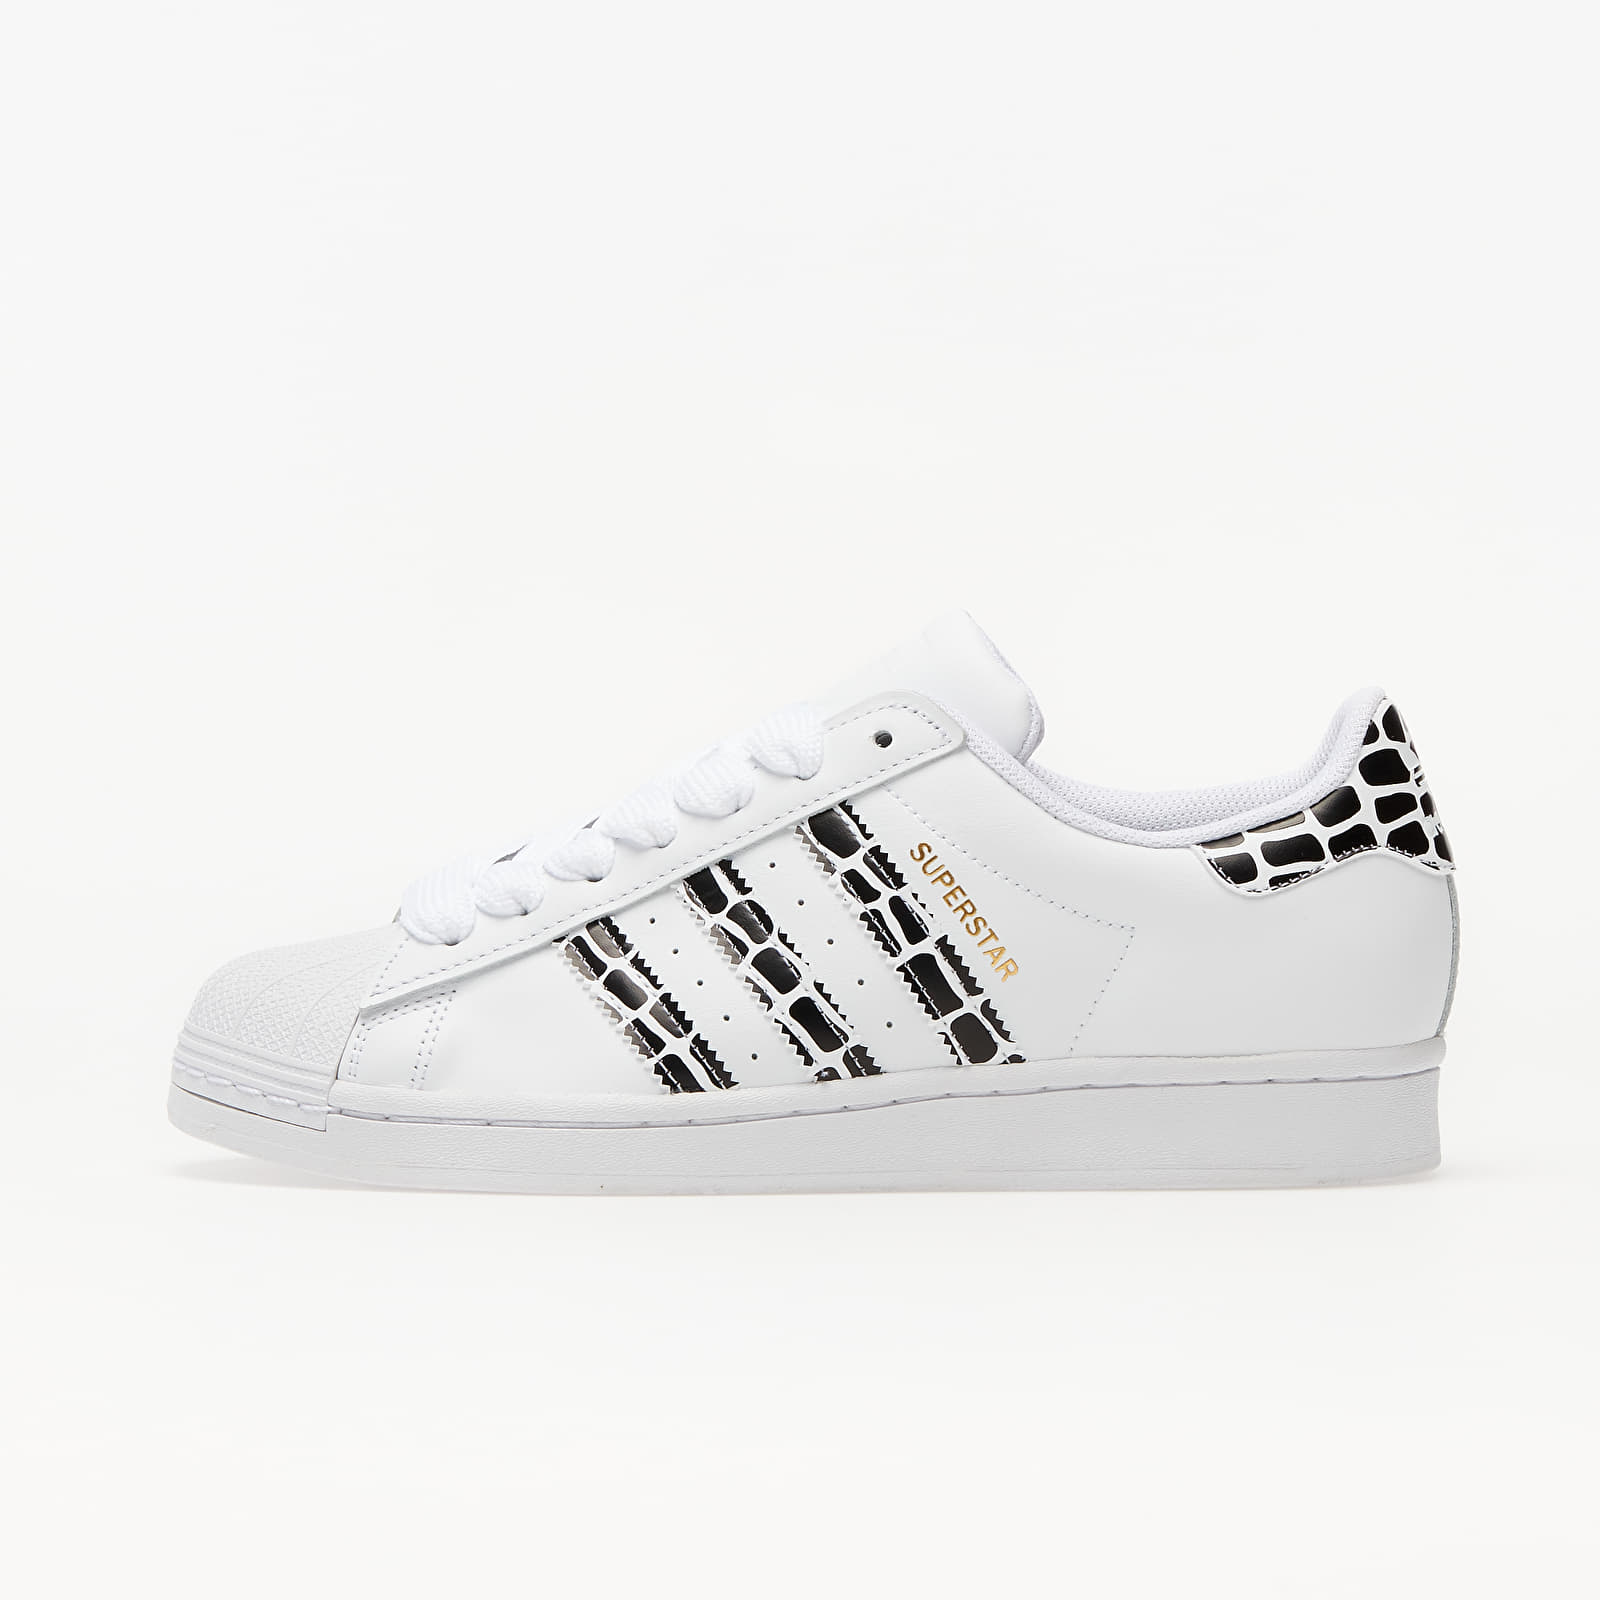 Women's shoes adidas Superstar W Ftw White/ Gold Metalic/ Core Black